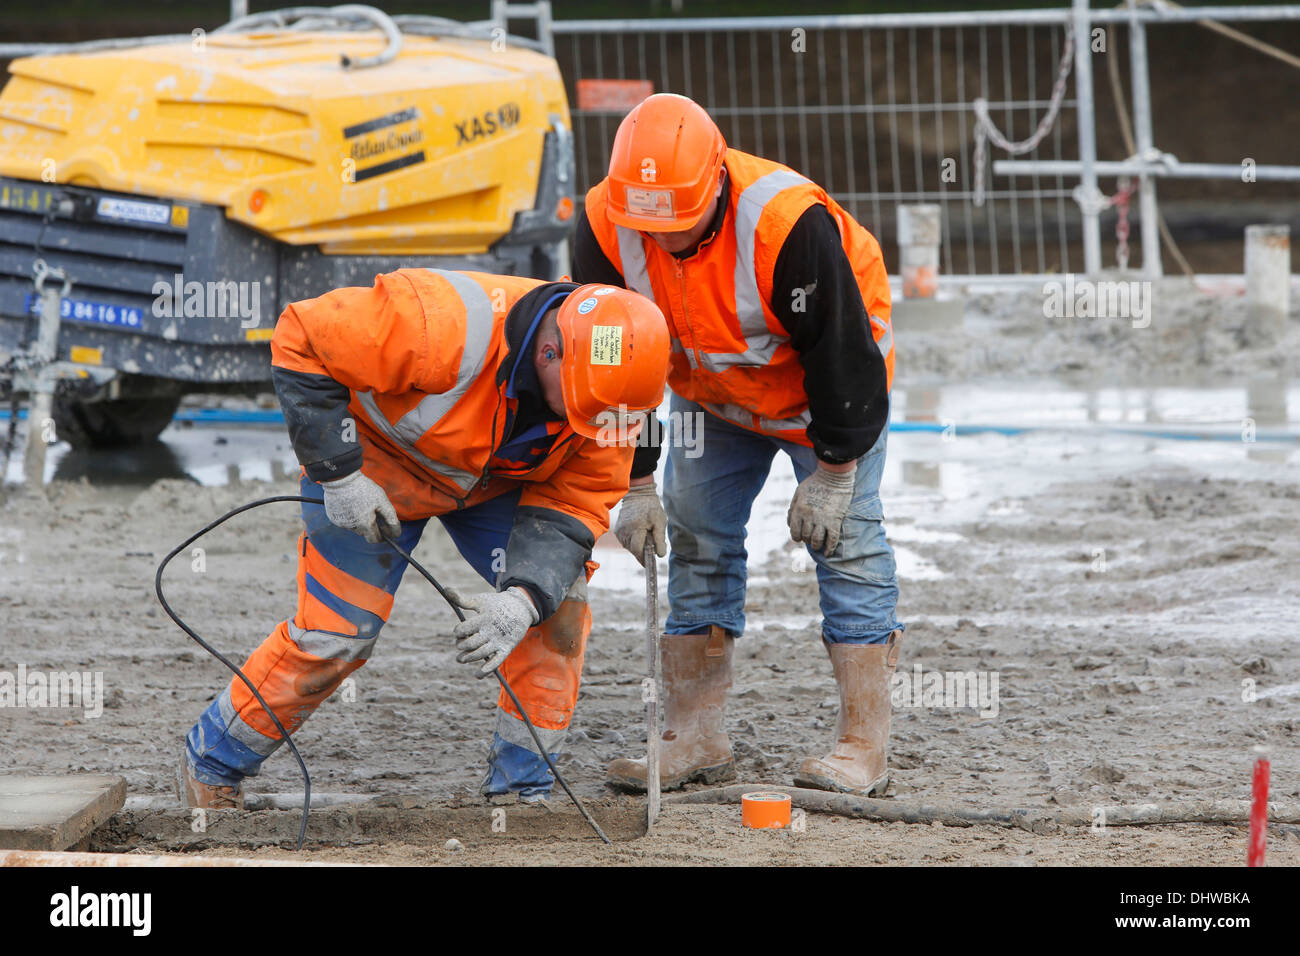 Workers on a building site Stock Photo